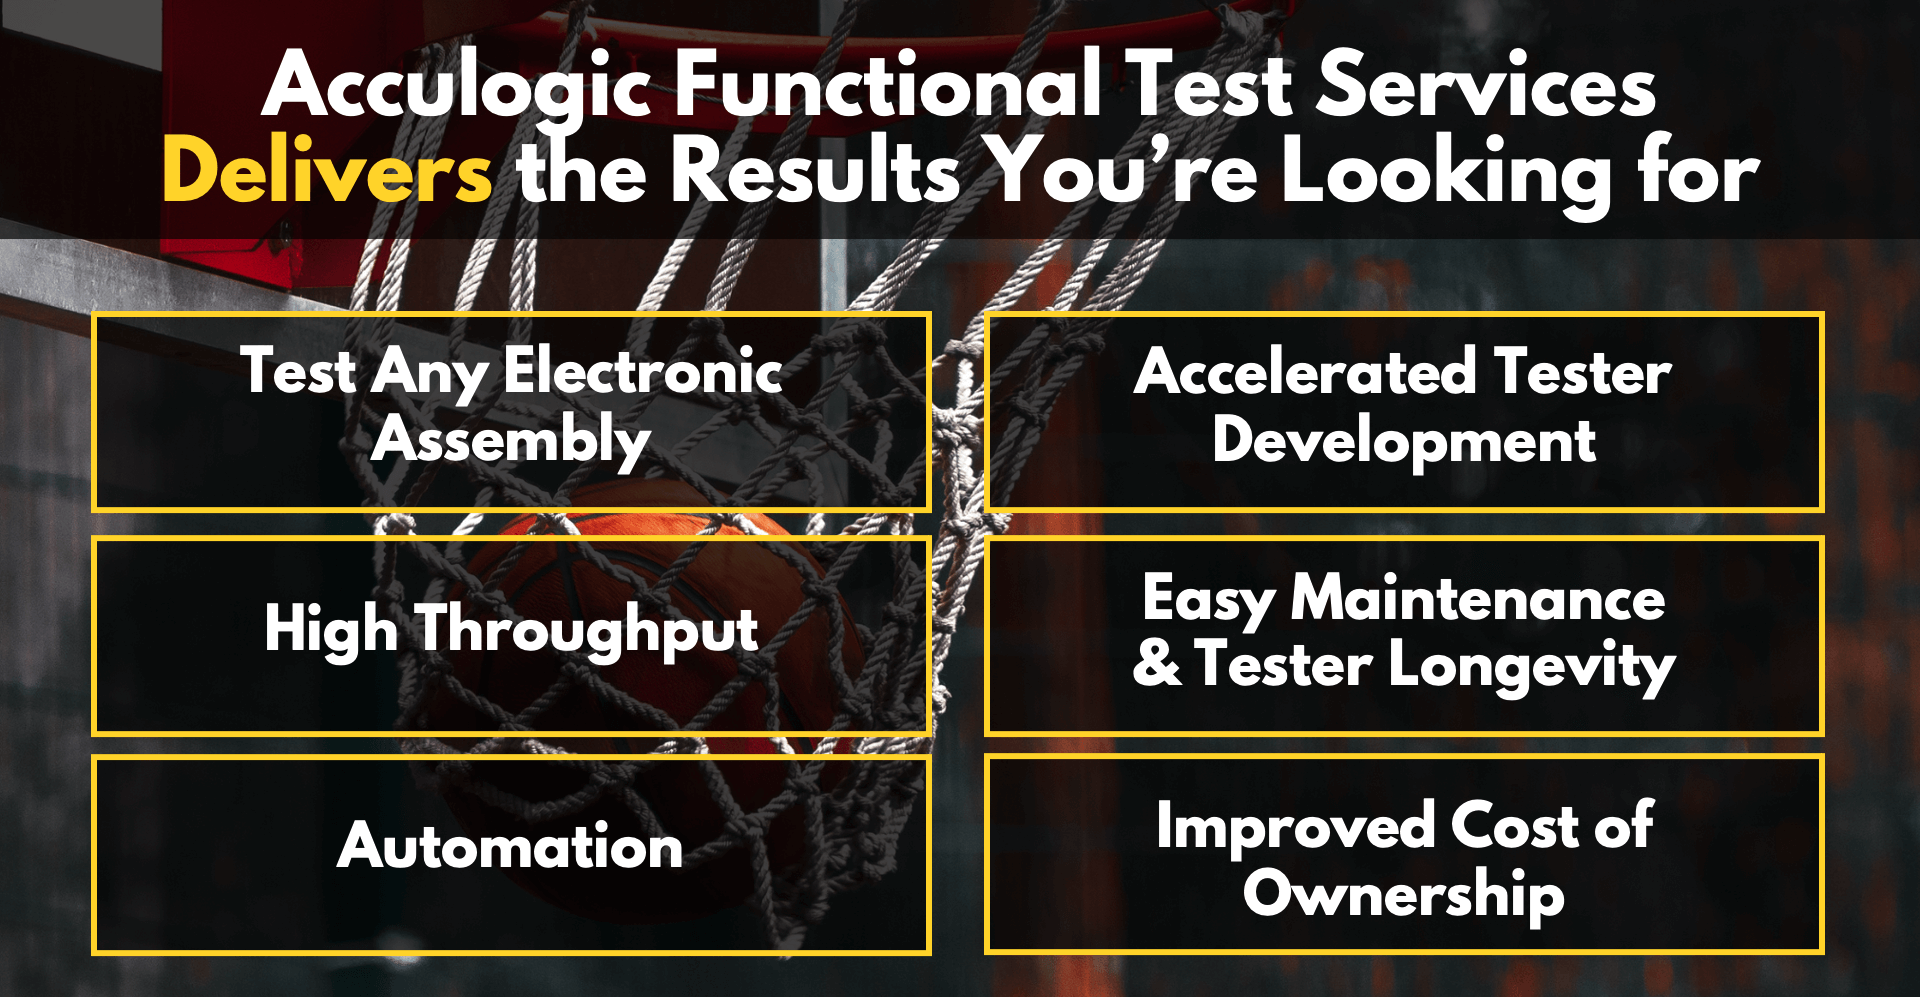 Acculogic Functional Test Services